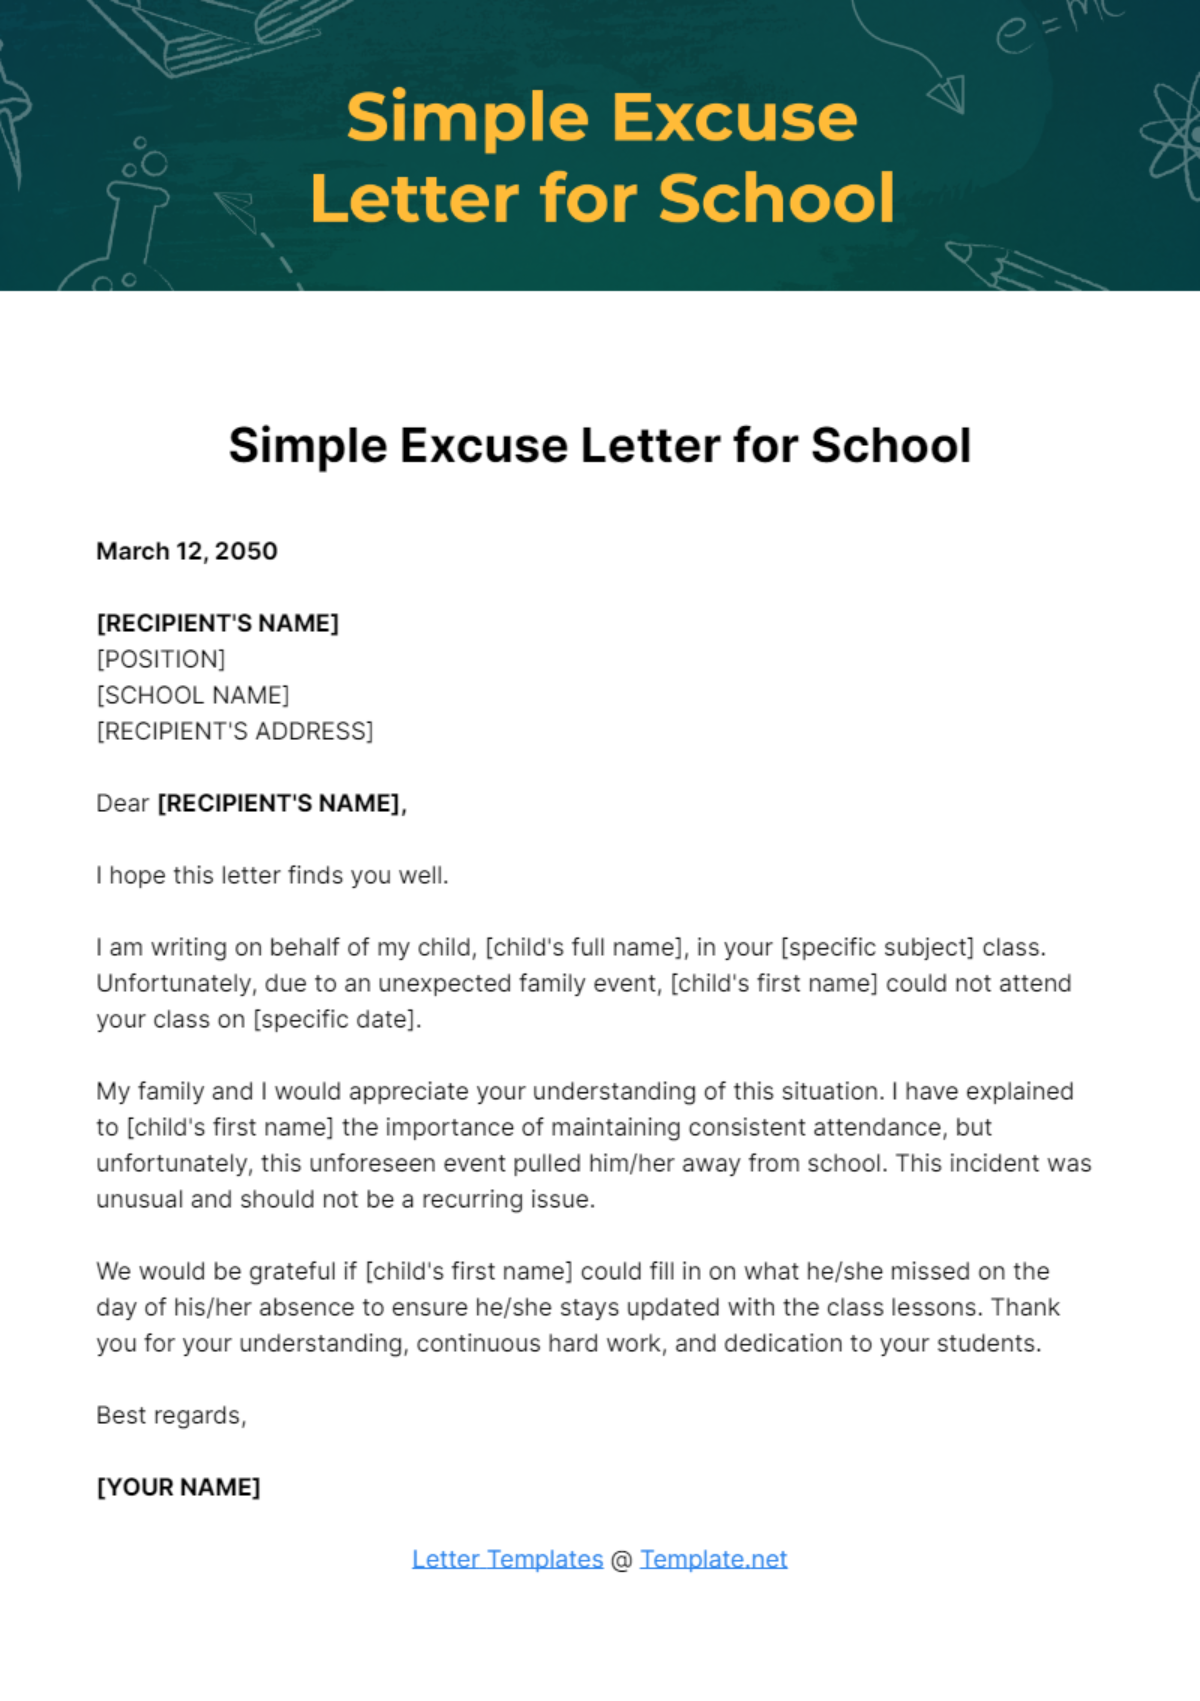 Simple Excuse Letter for School Template